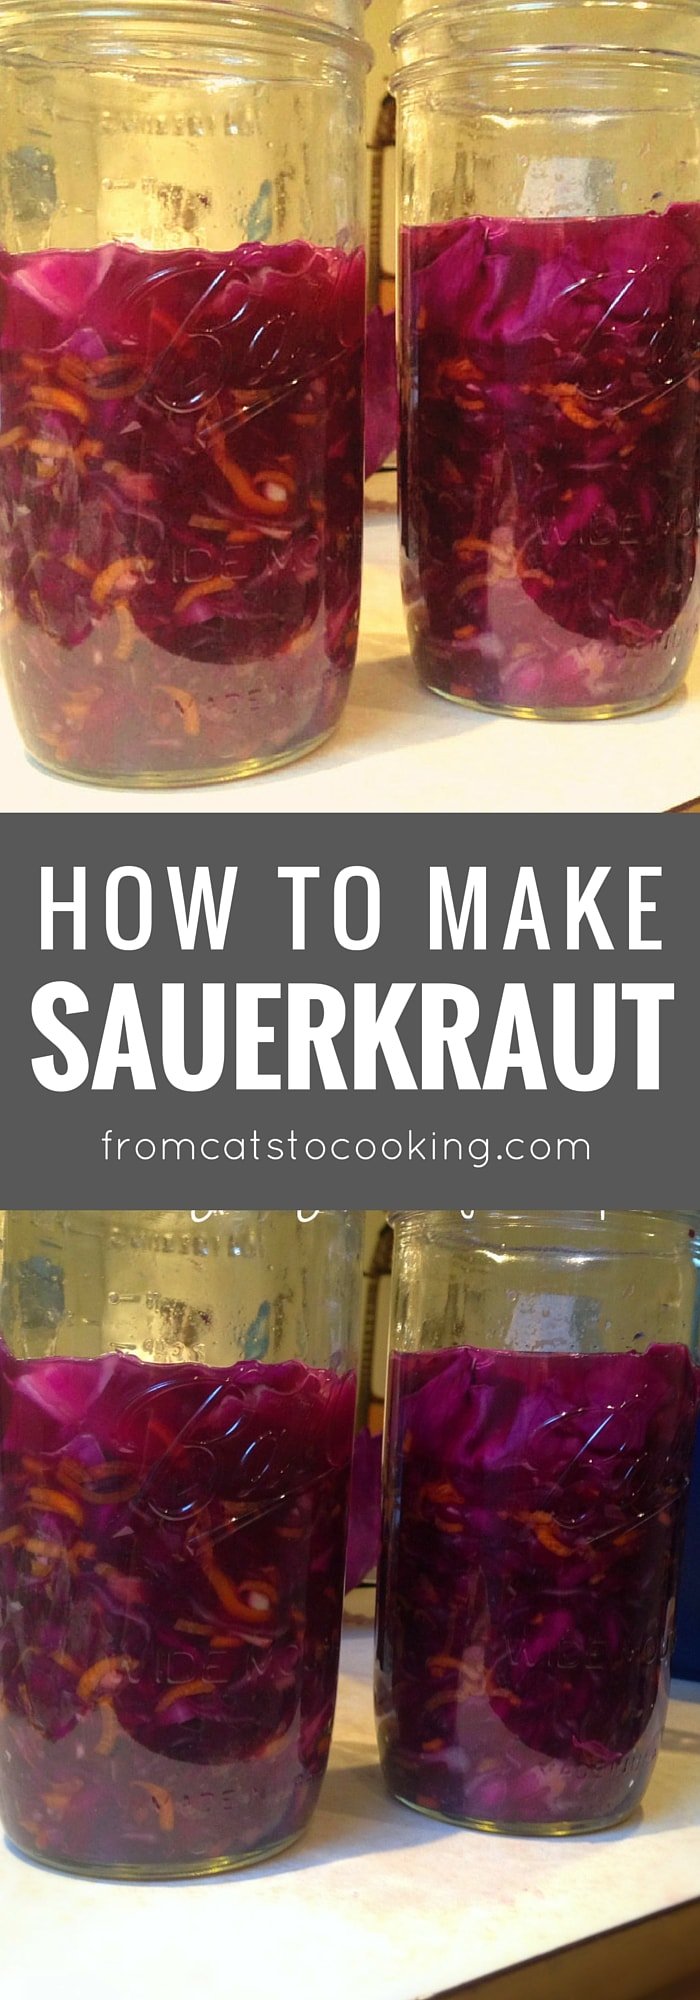 How to Make Sauerkraut - an easy recipe for this tasty condiment and side dish that's full of healthy probiotics. Click through to get the recipe or save this pin for later.